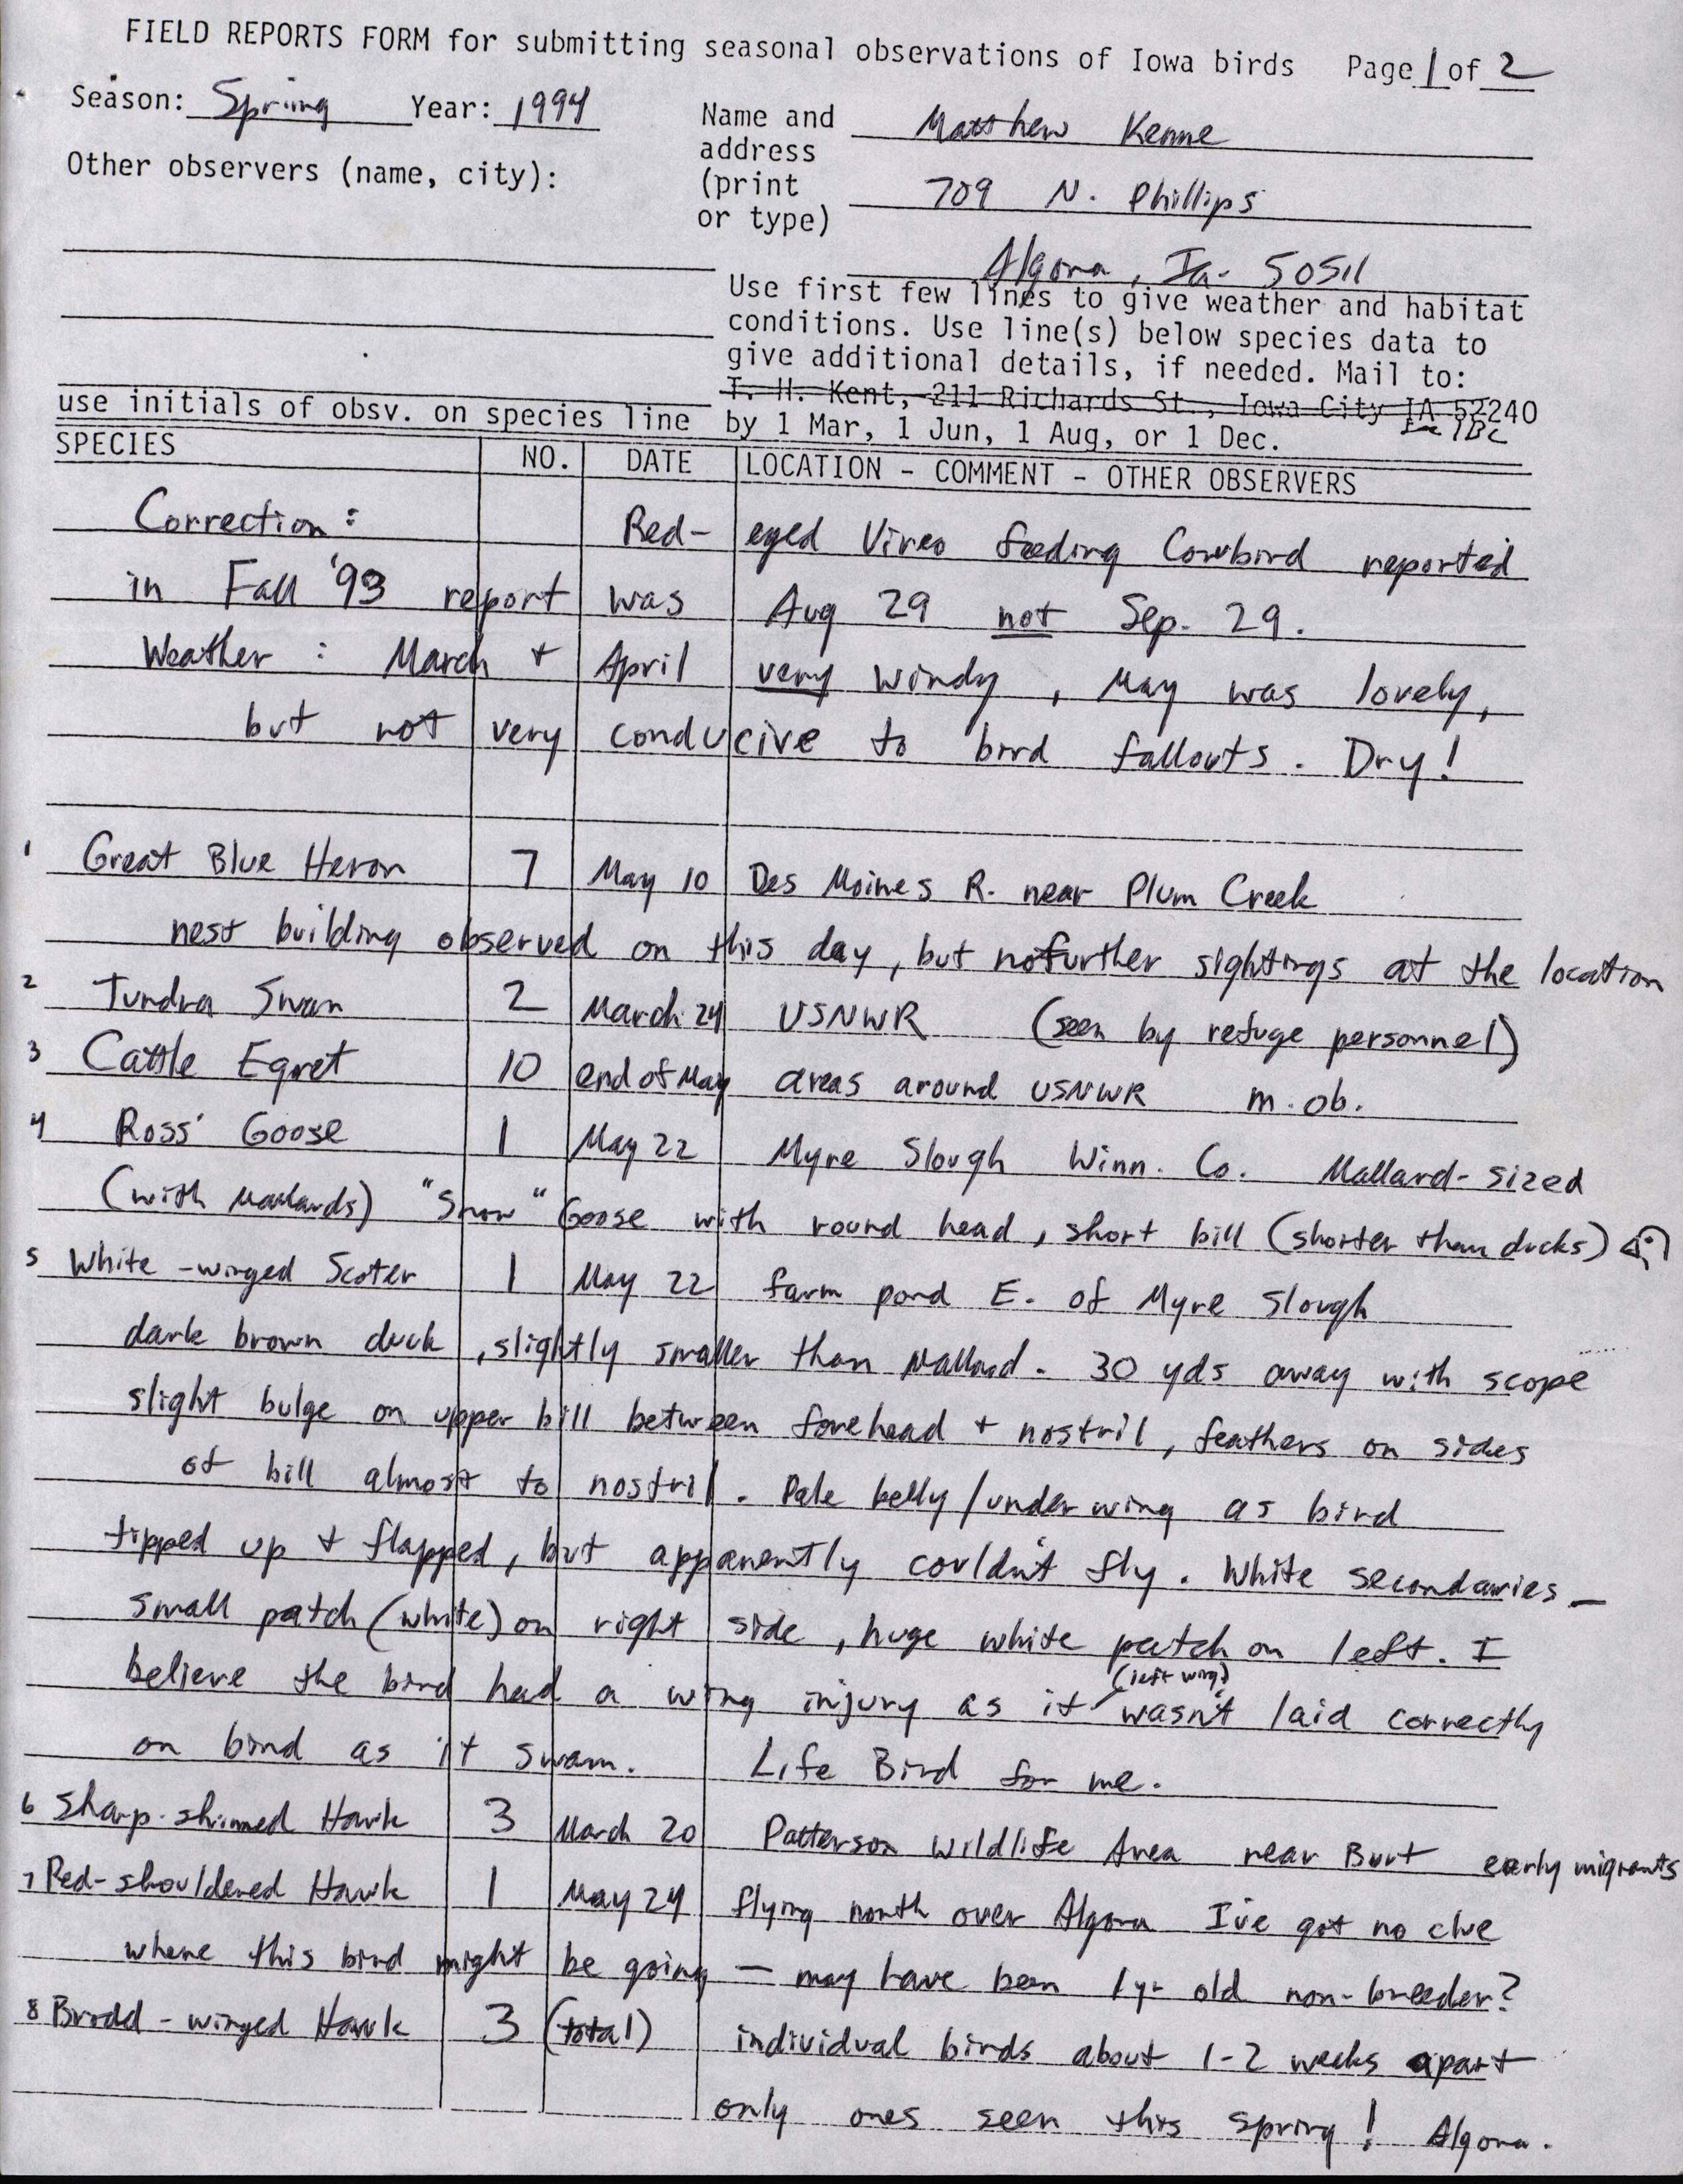 Field reports form for submitting seasonal observations of Iowa birds, Matthew Kenne, Spring 1994